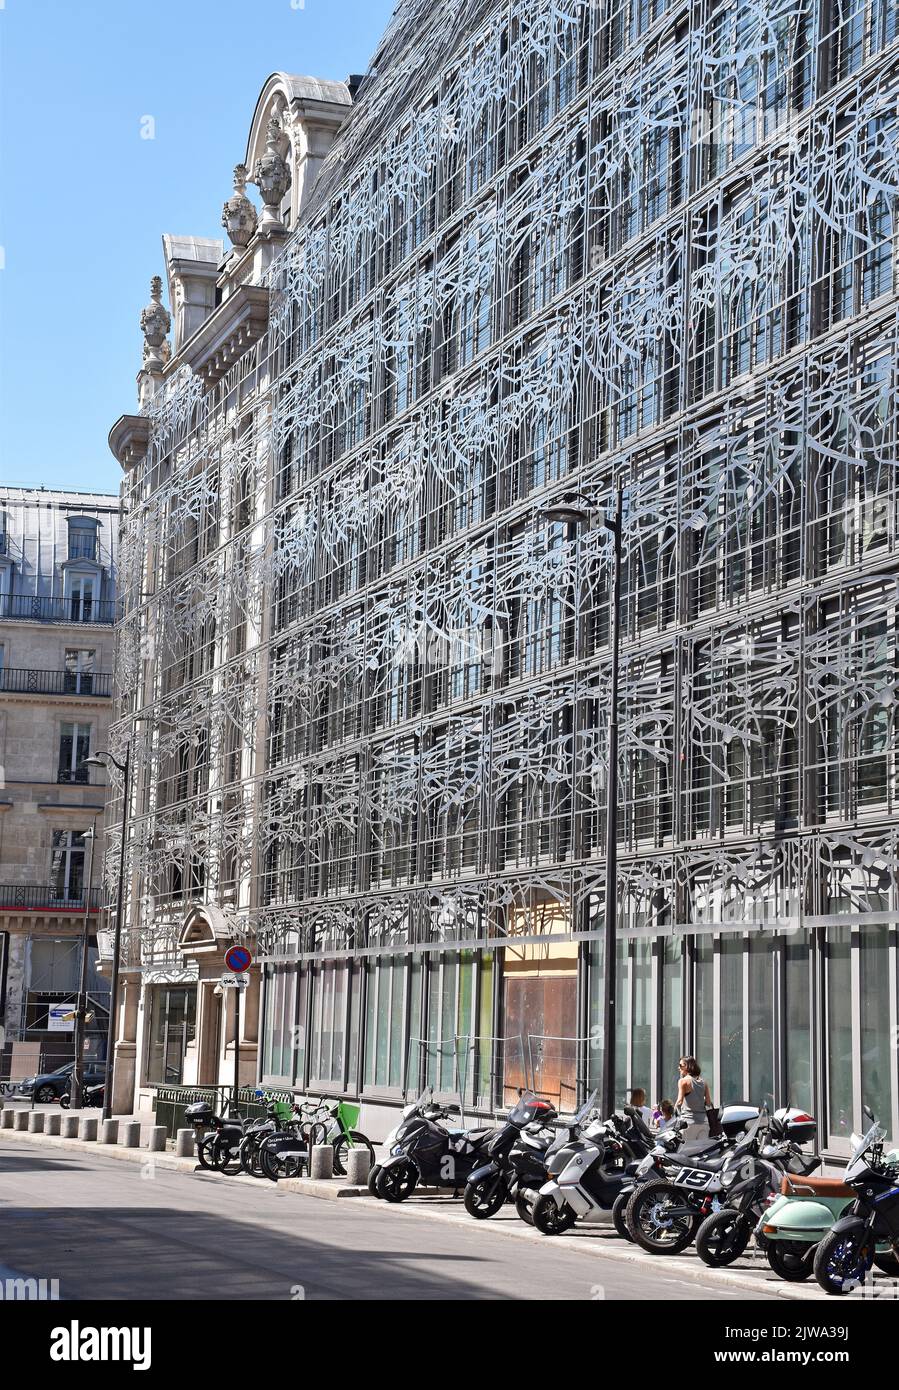 Buildings in an entire Paris street block covered with a metal framework, of filigree steel strips in abstract arabesque patterns on all upper floors Stock Photo